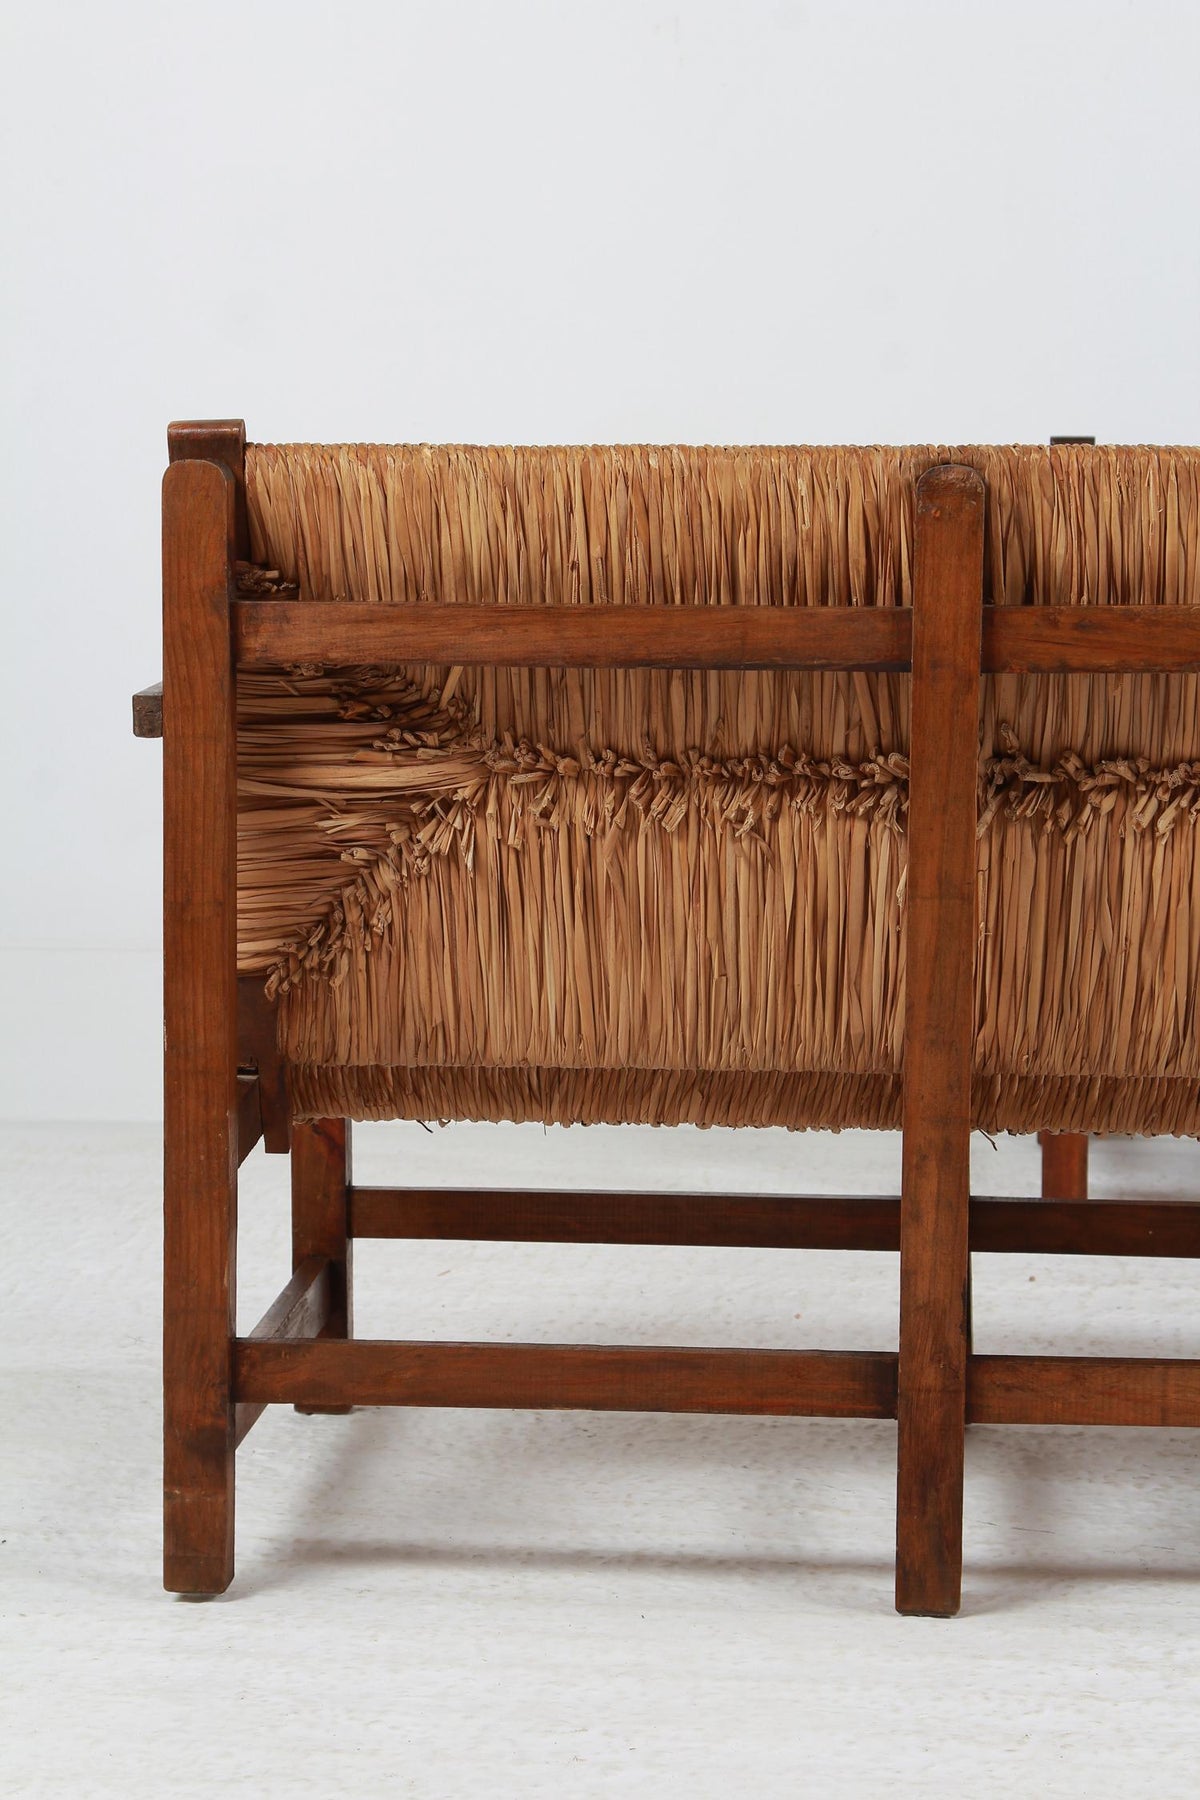 Rare Pair of Spanish Sofa/Benches in Pine and Woven Straw